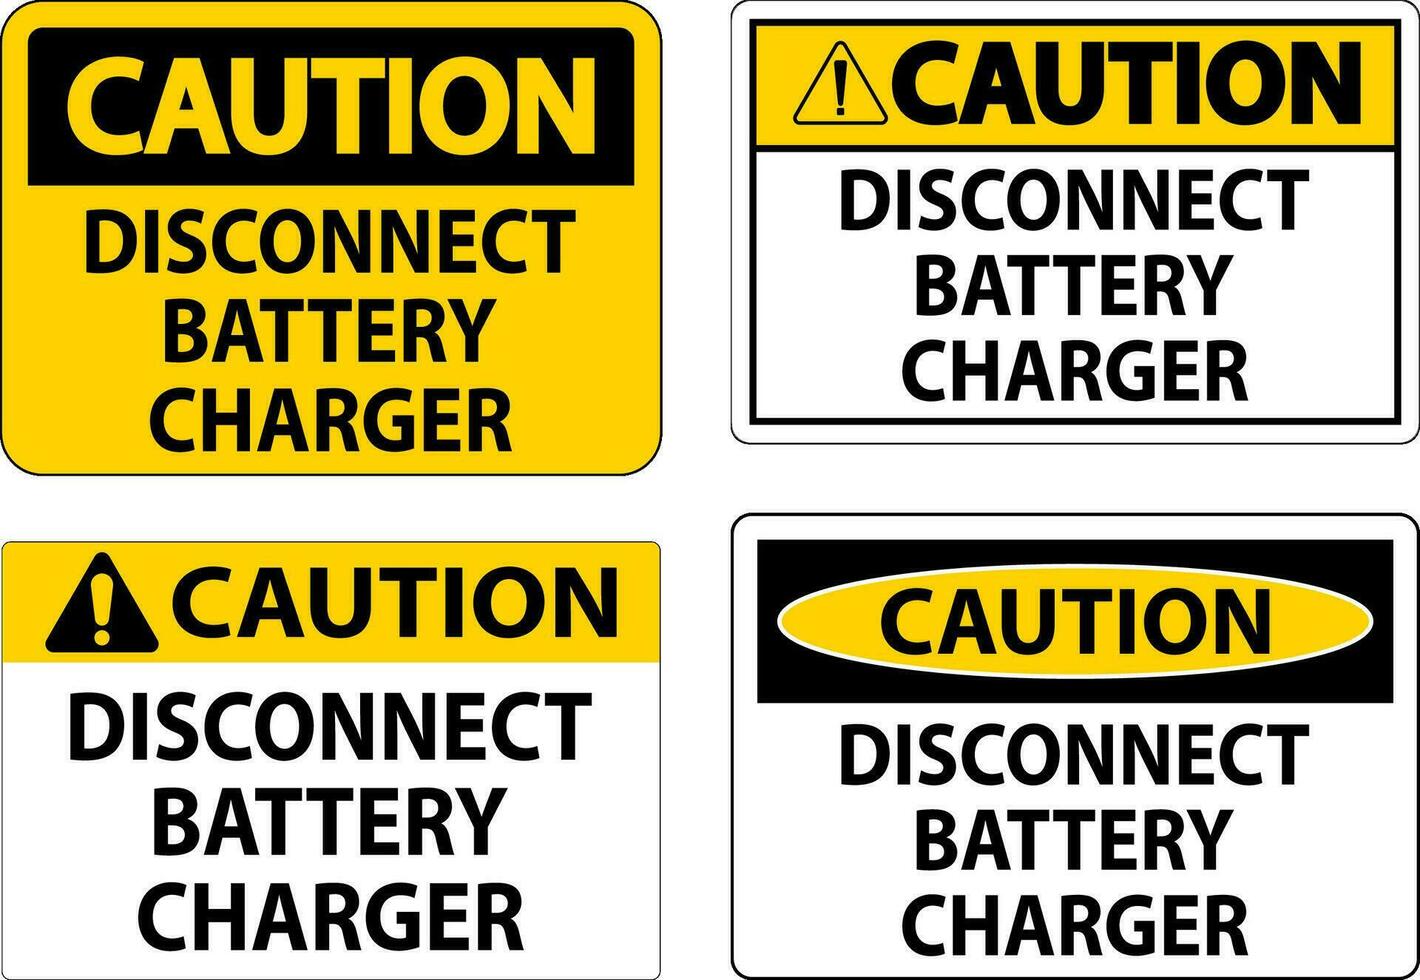 Caution Sign Disconnect Battery Charger On White Background vector